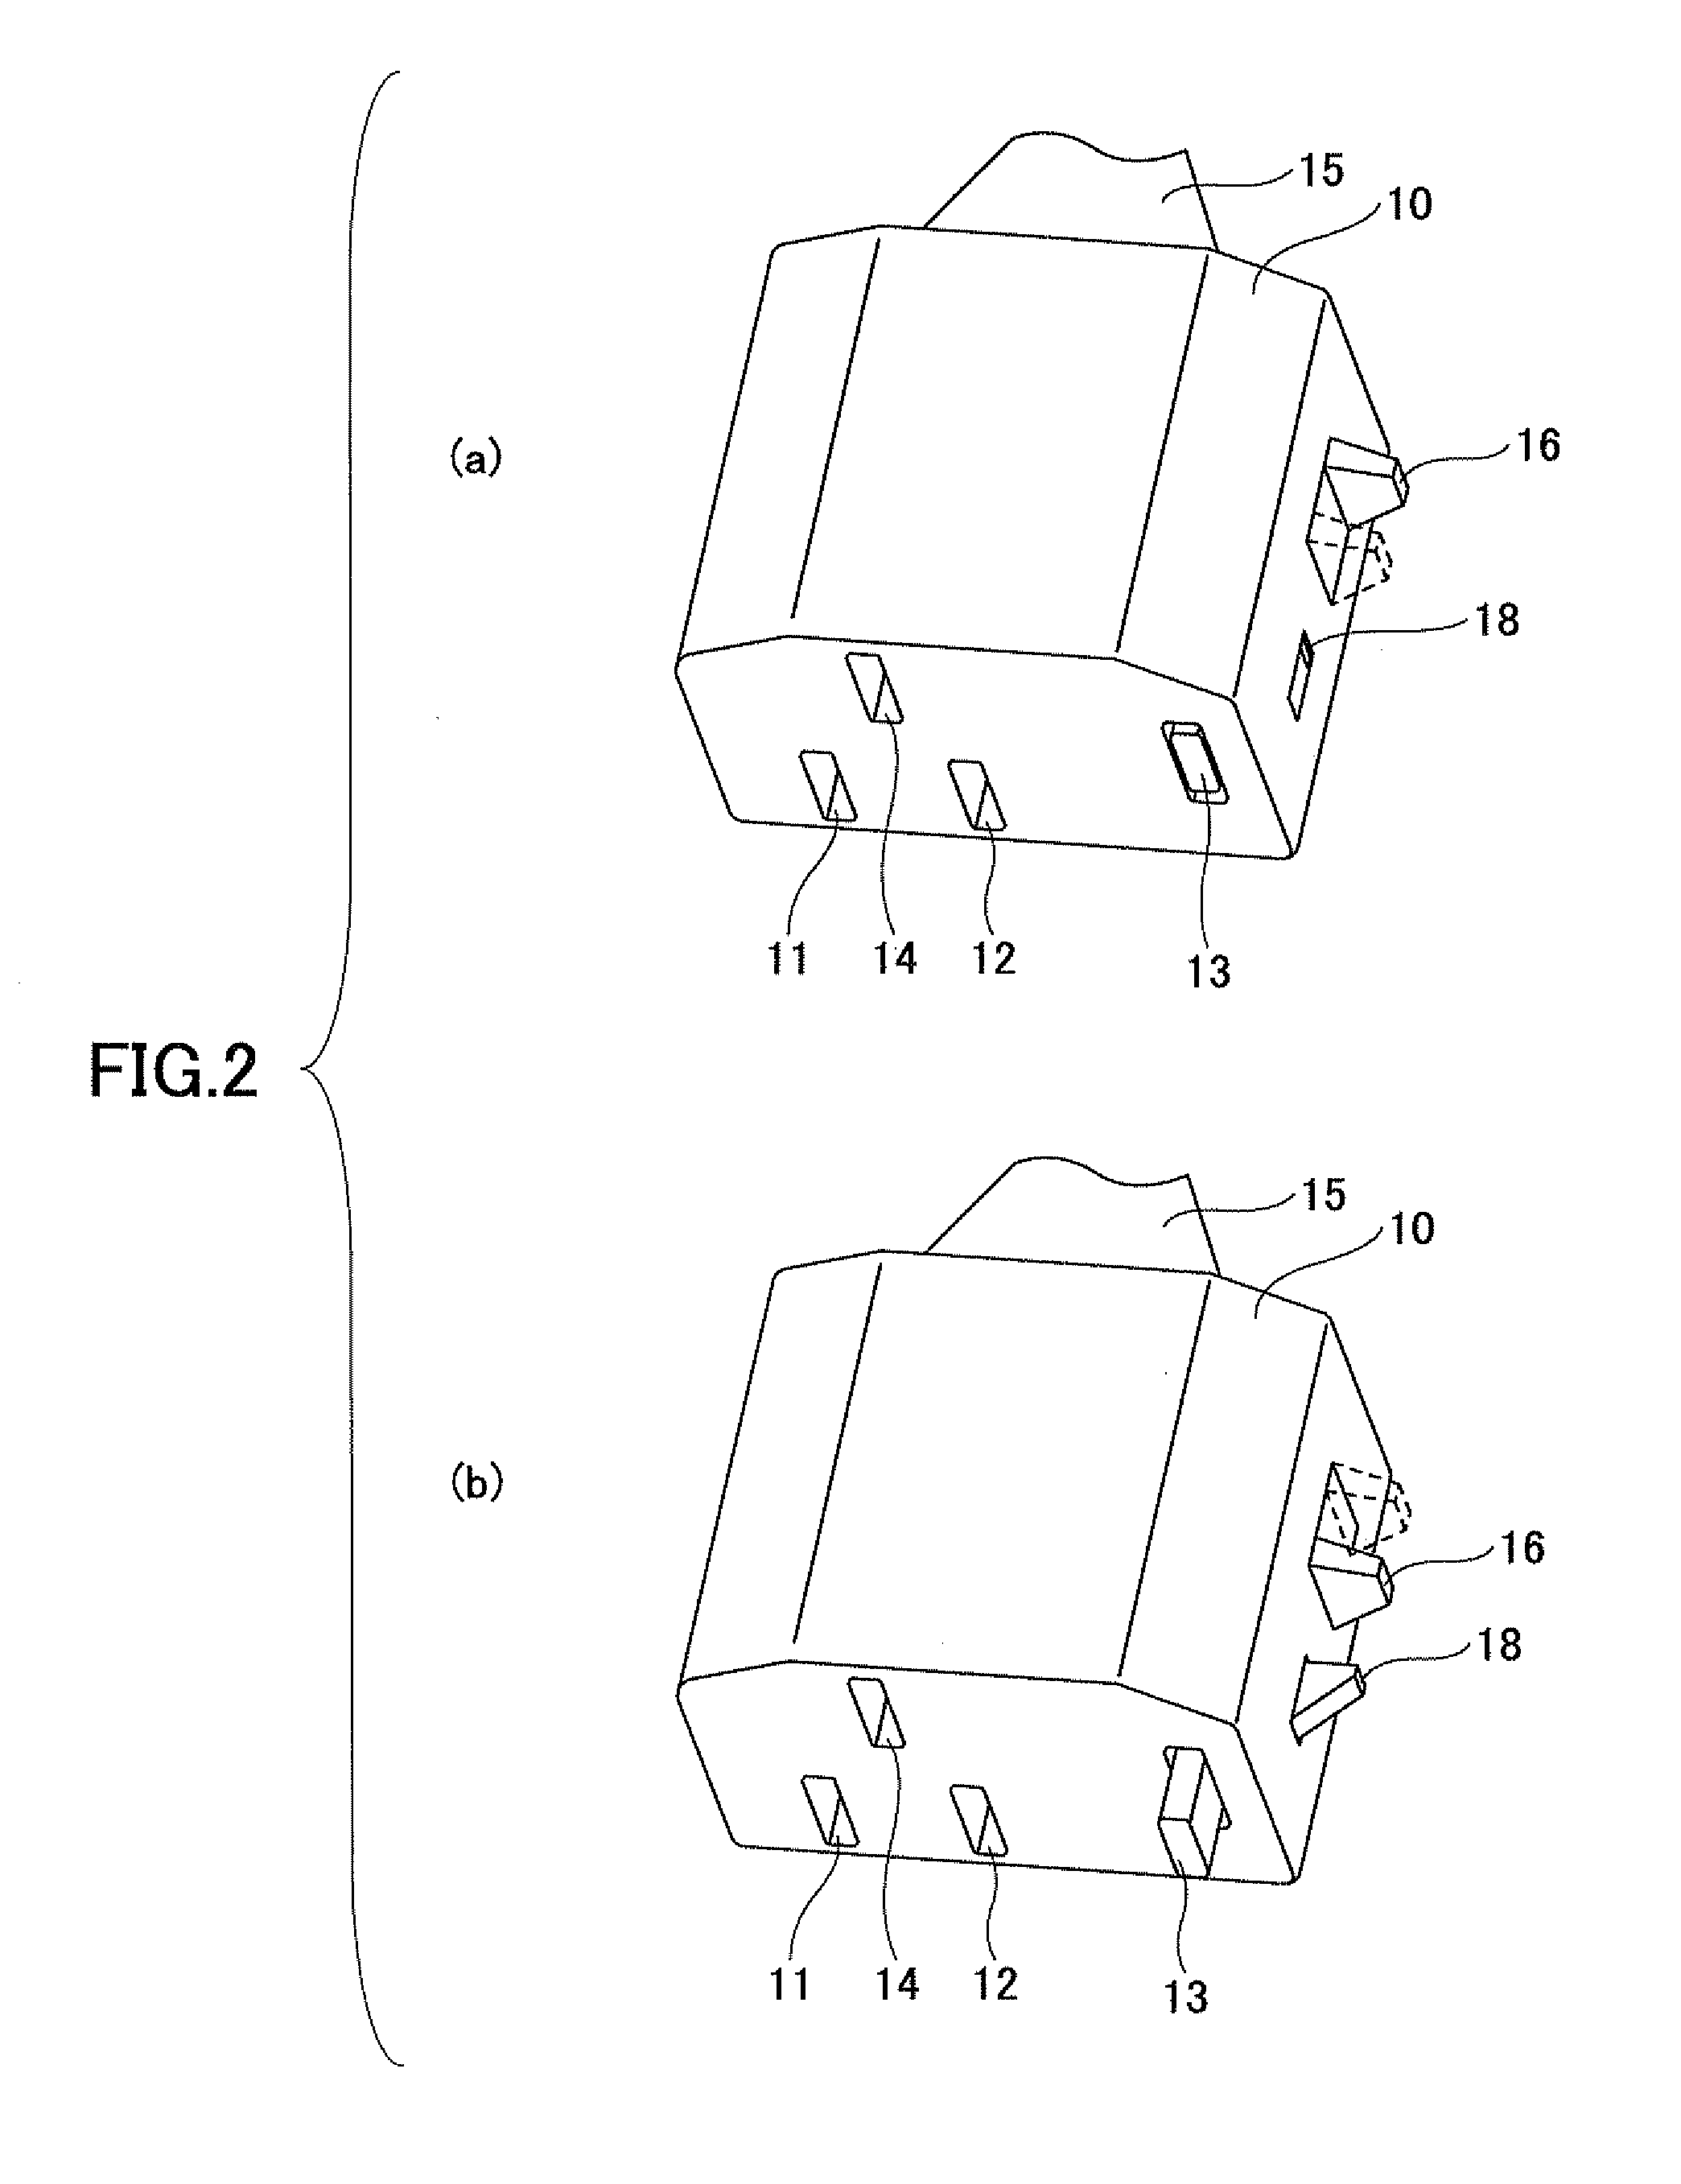 Connector device, receiving connector, and inserting connector